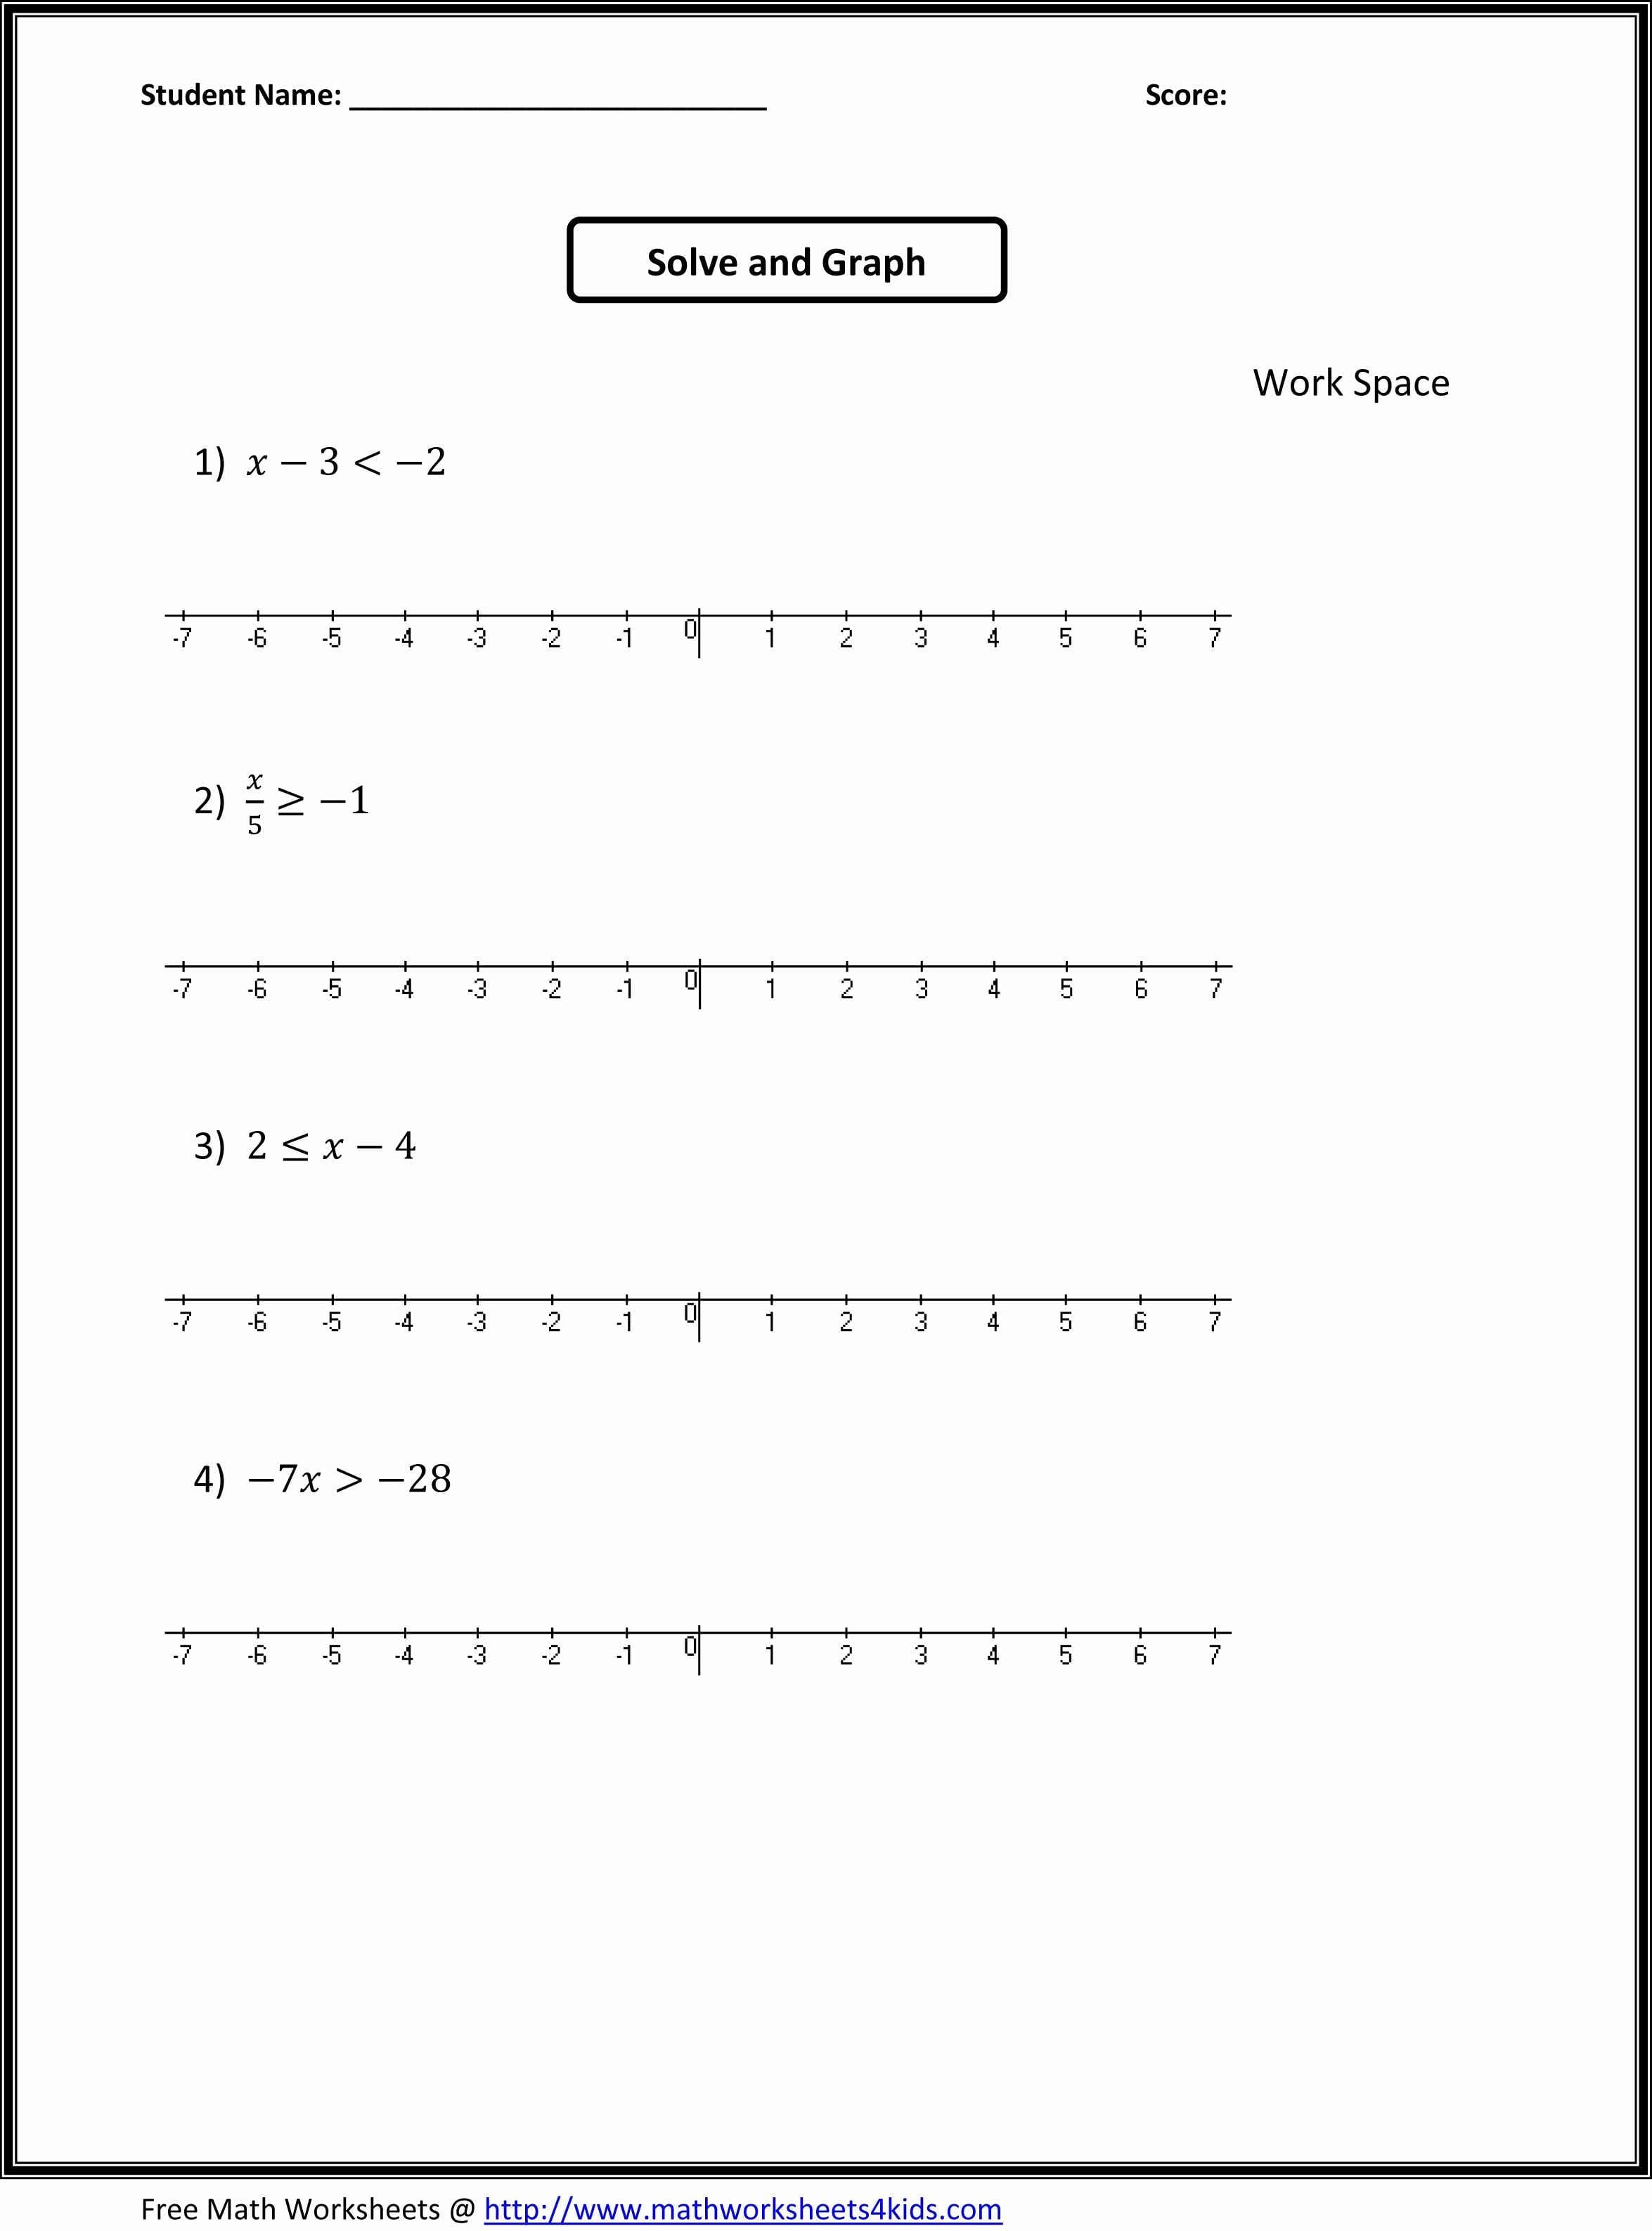 Scientific Notation And Significant Figures Worksheet